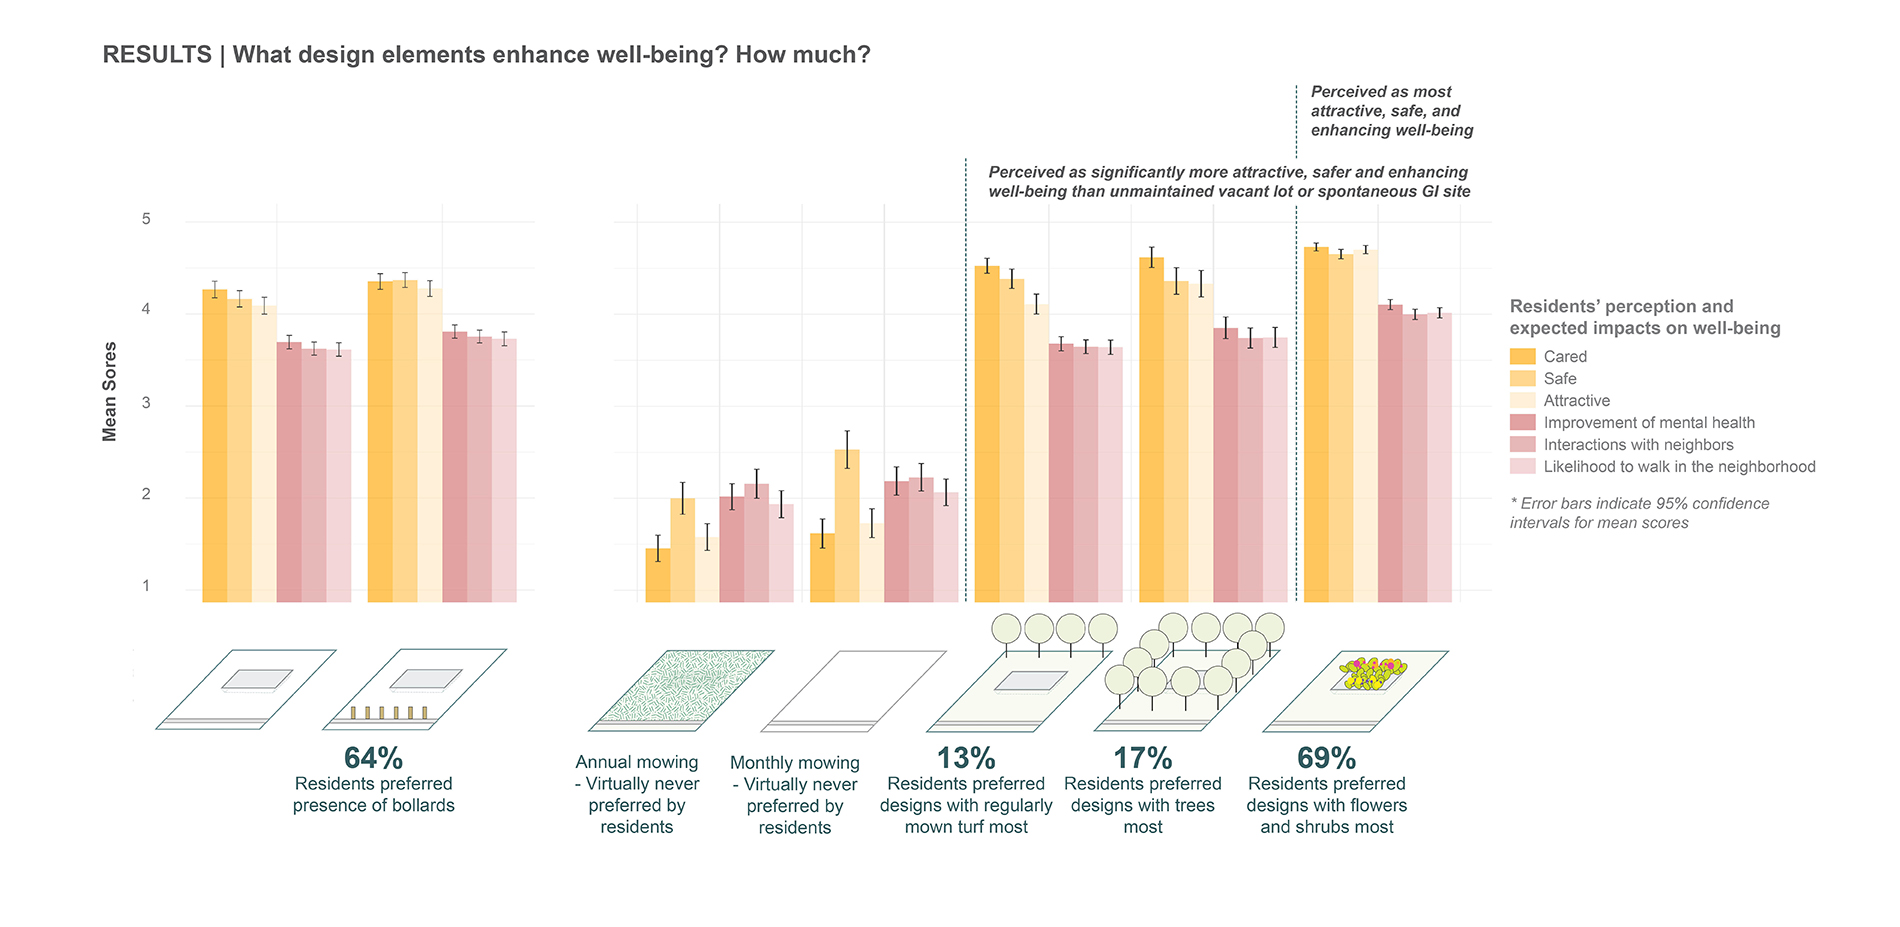 RESULTS: What design elements enhance well-being? How much?